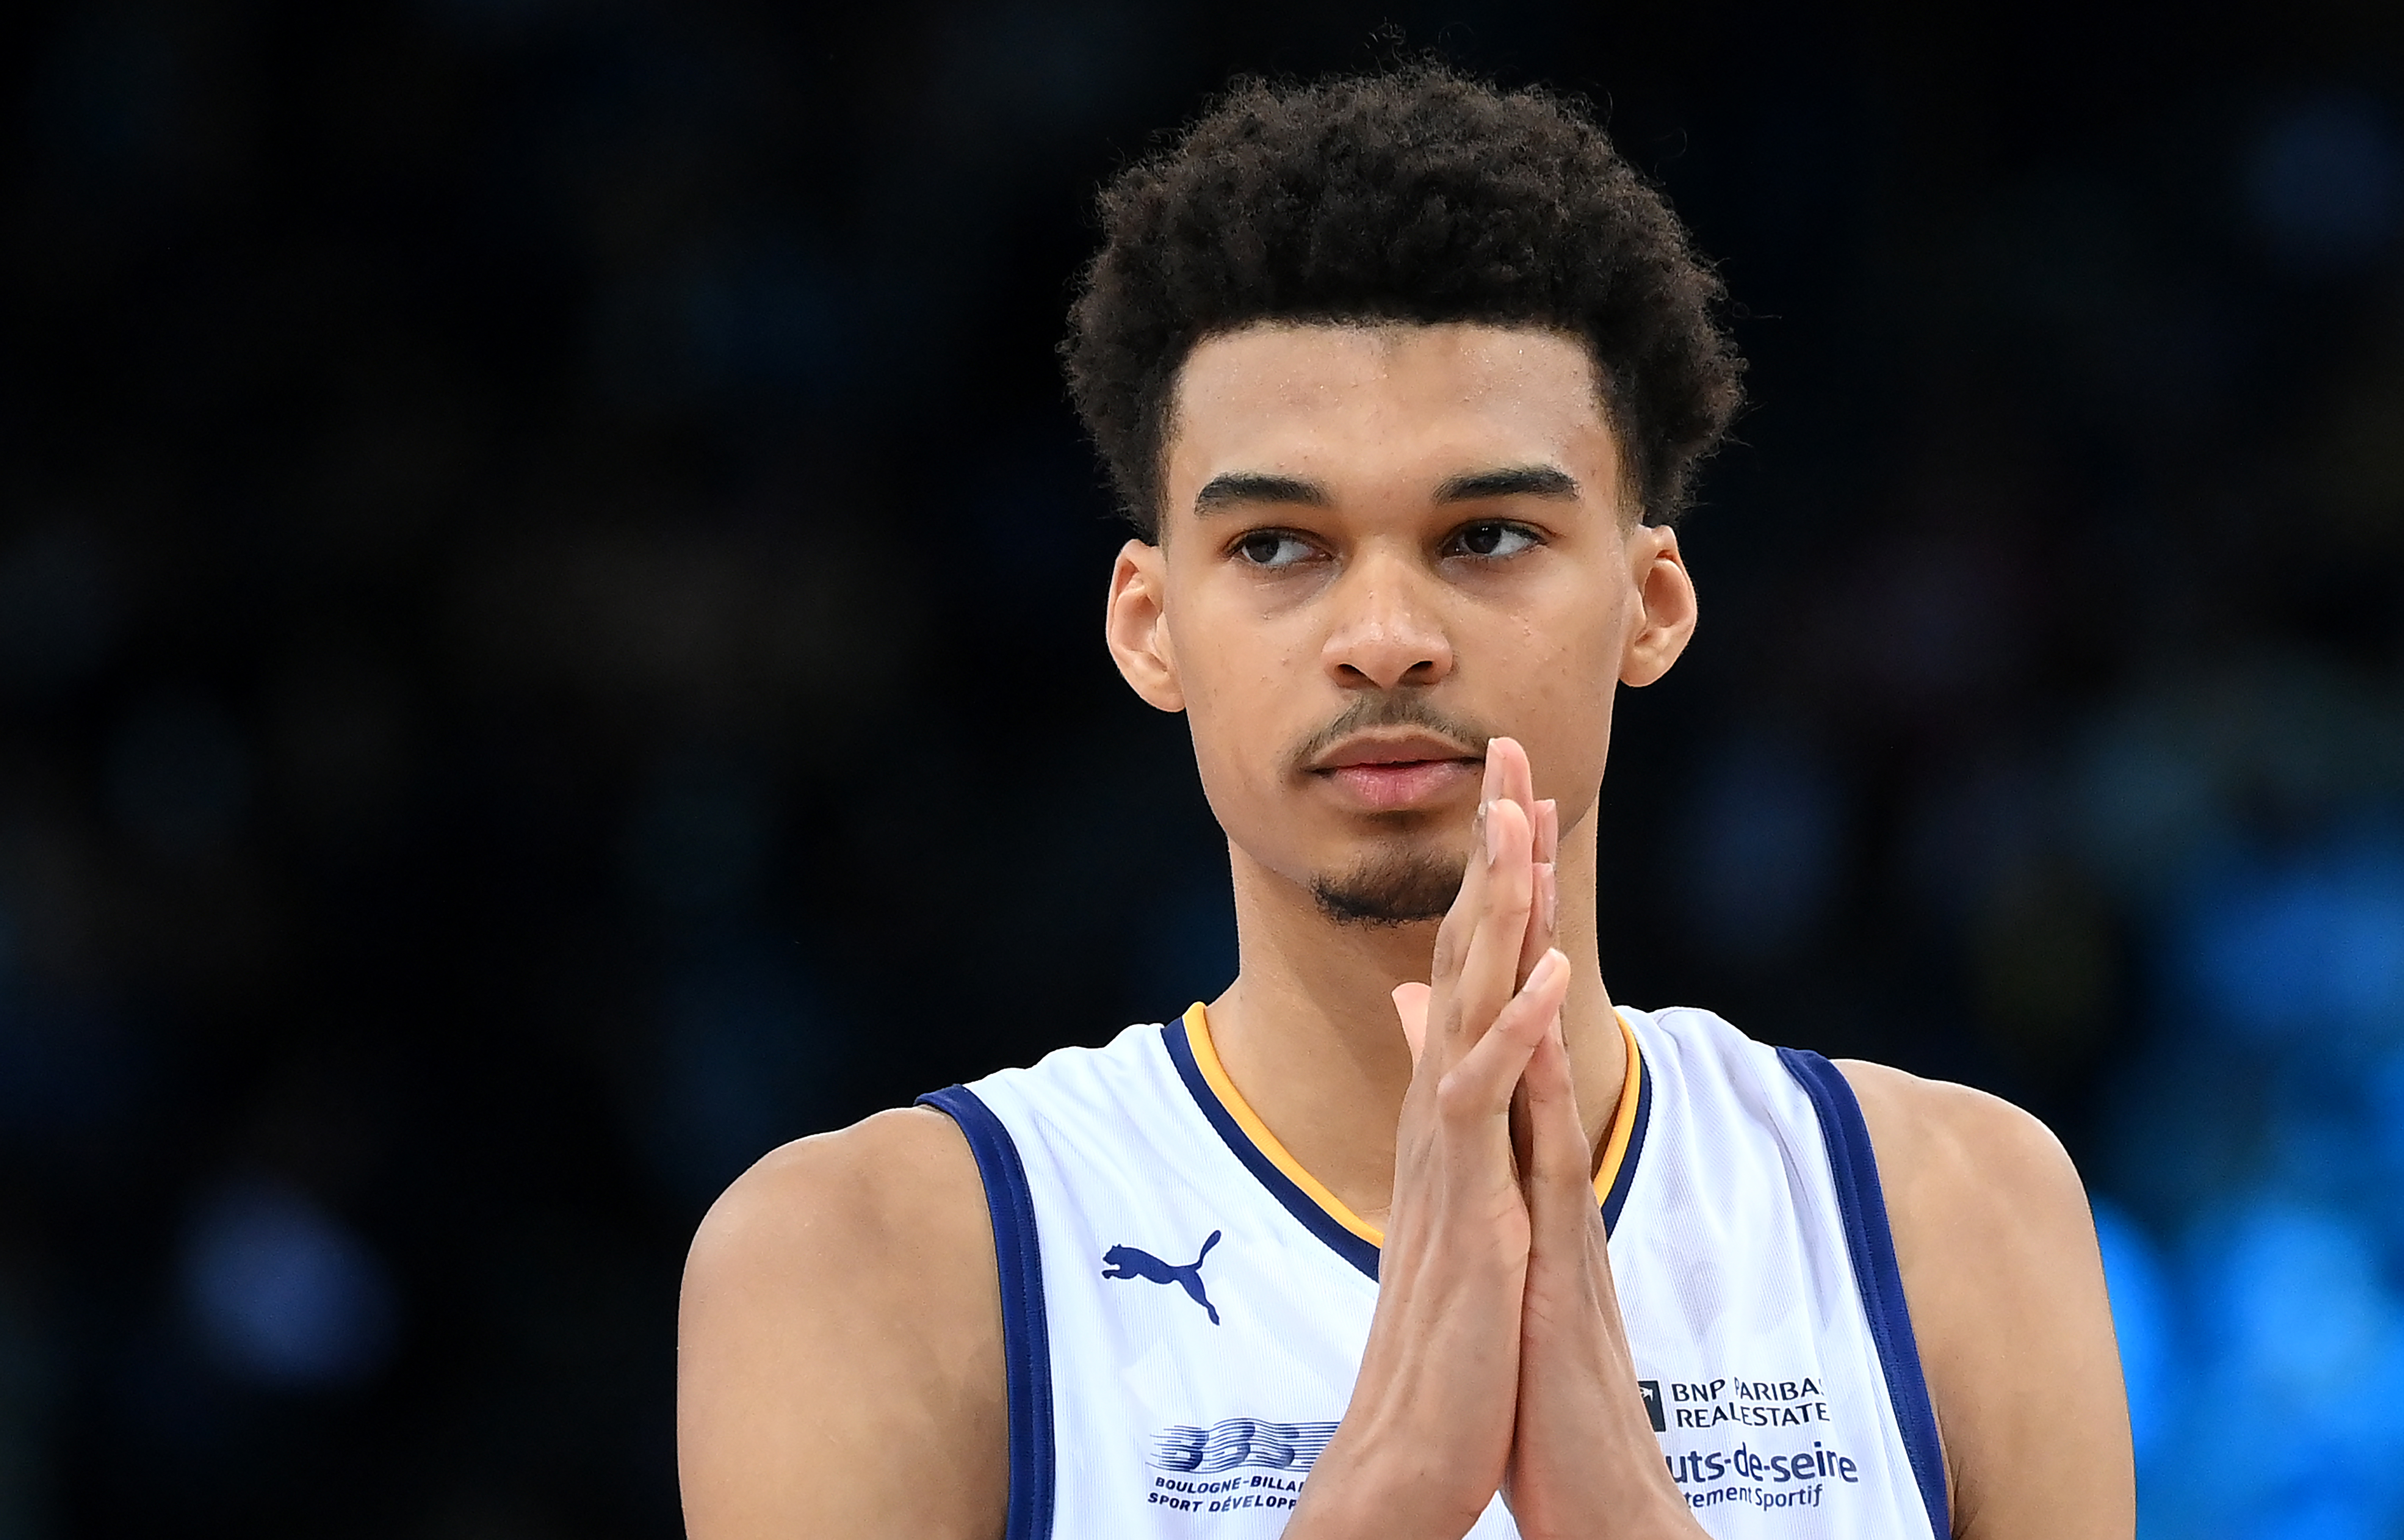 The Top International Prospects for the 2023 NBA Draft - NBA Draft Room